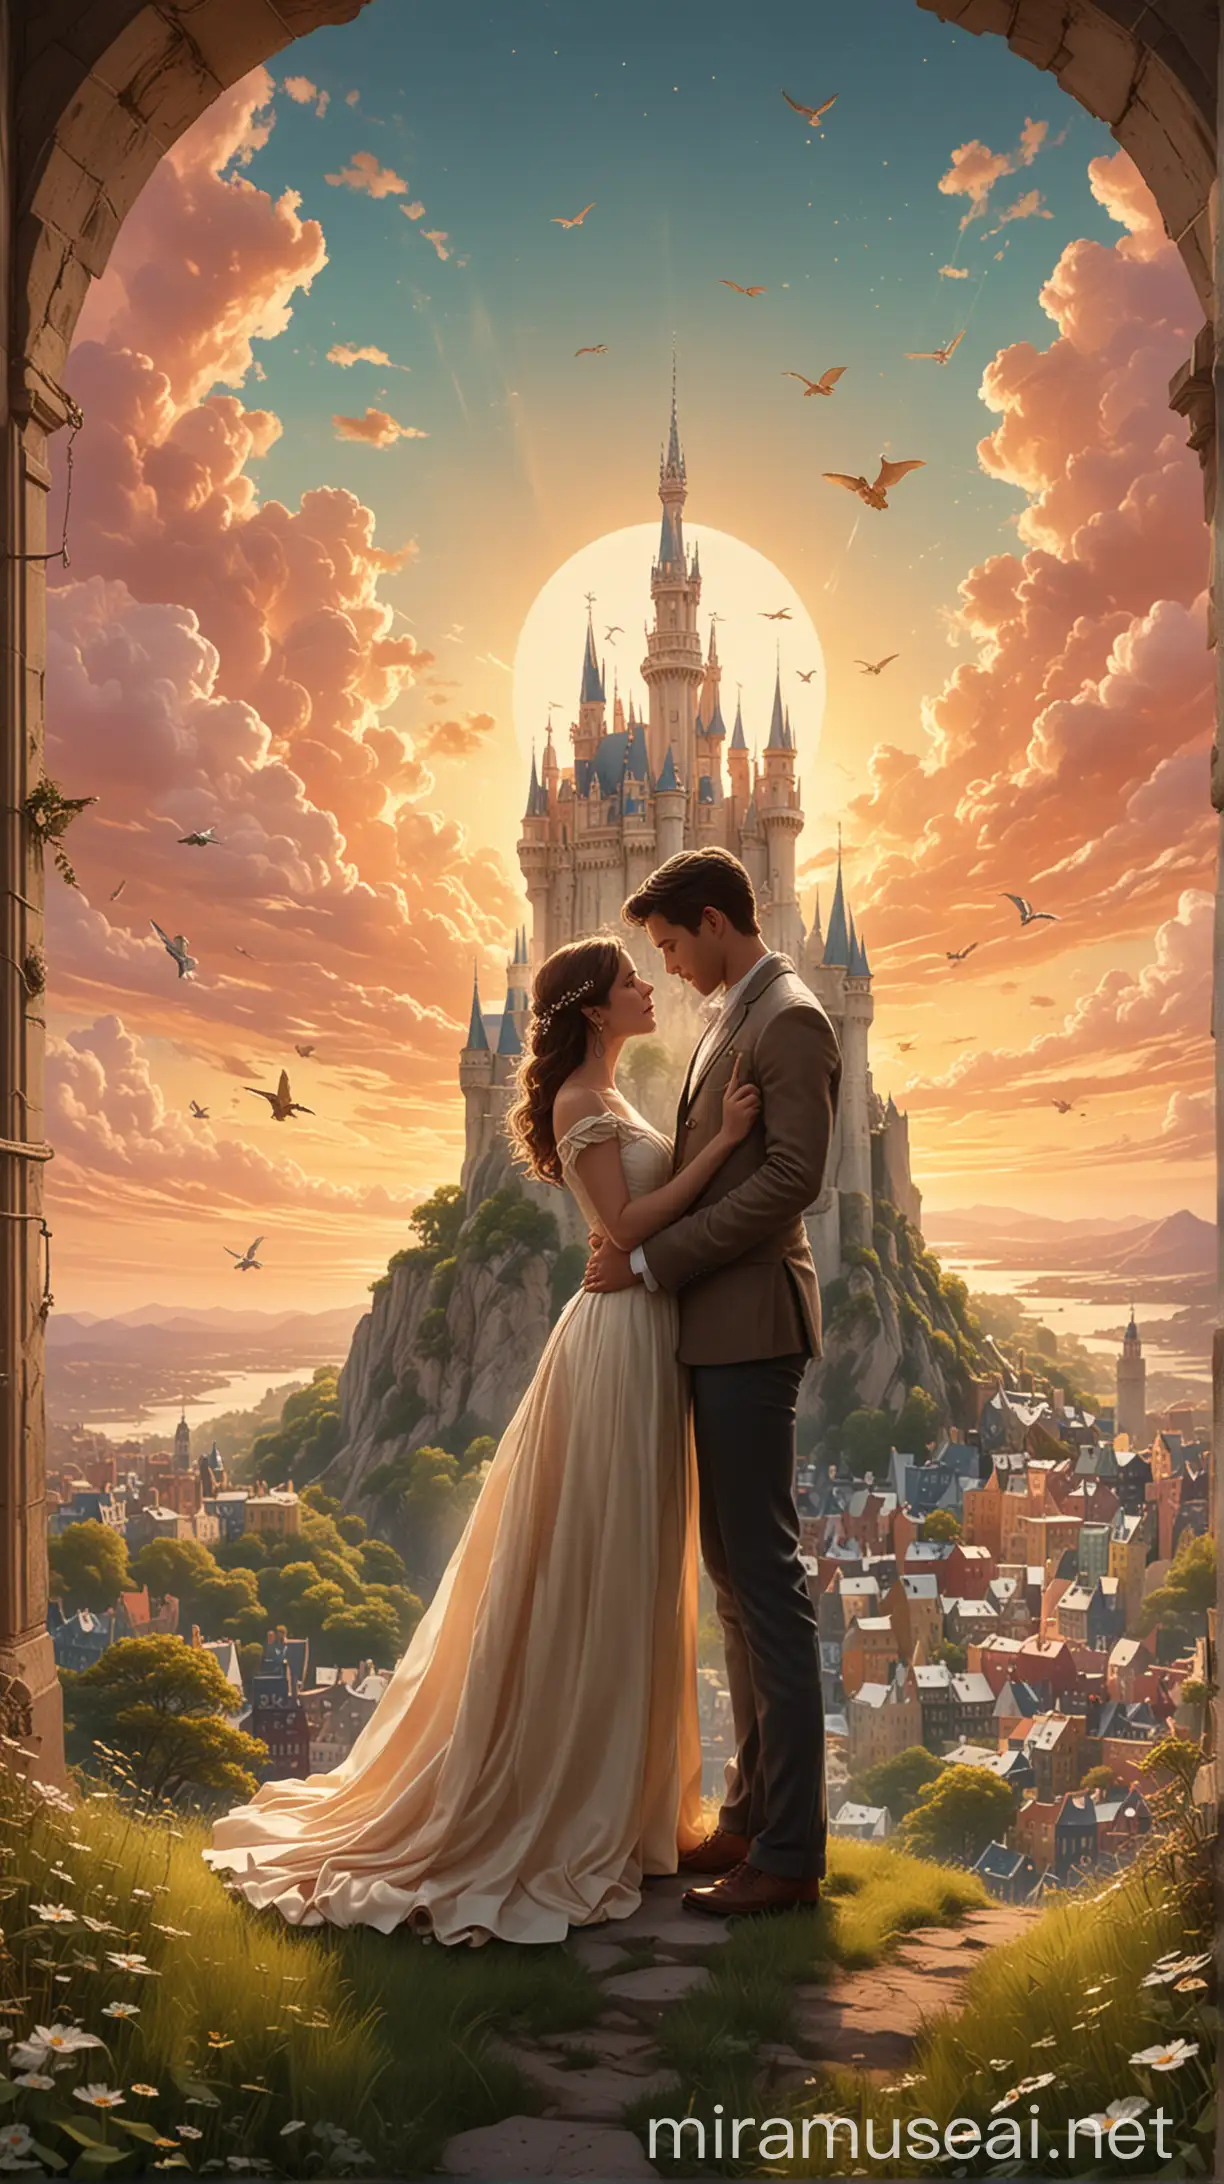 Romantic Couples Journey Sunset in New York City to Magical Wonderland